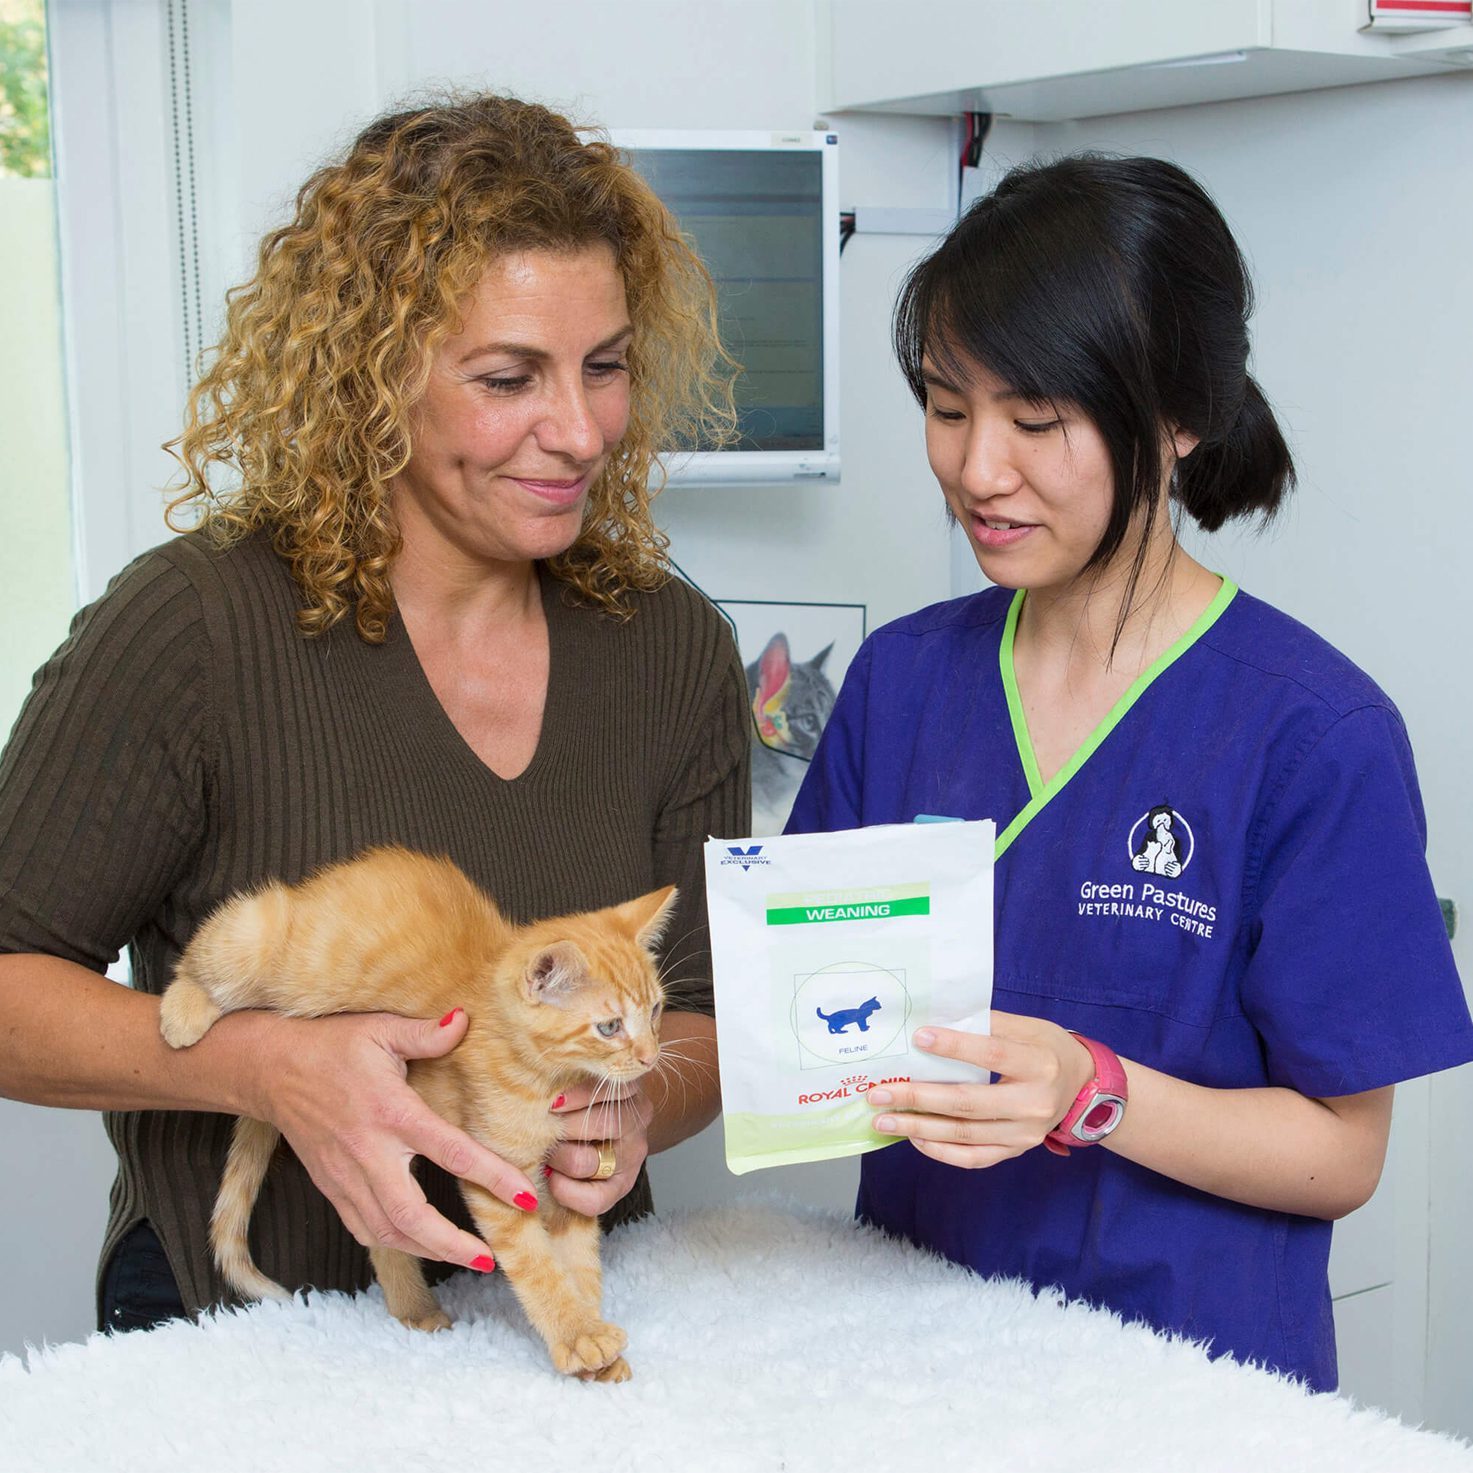 Staff Showing Medicine To Owner With Cat